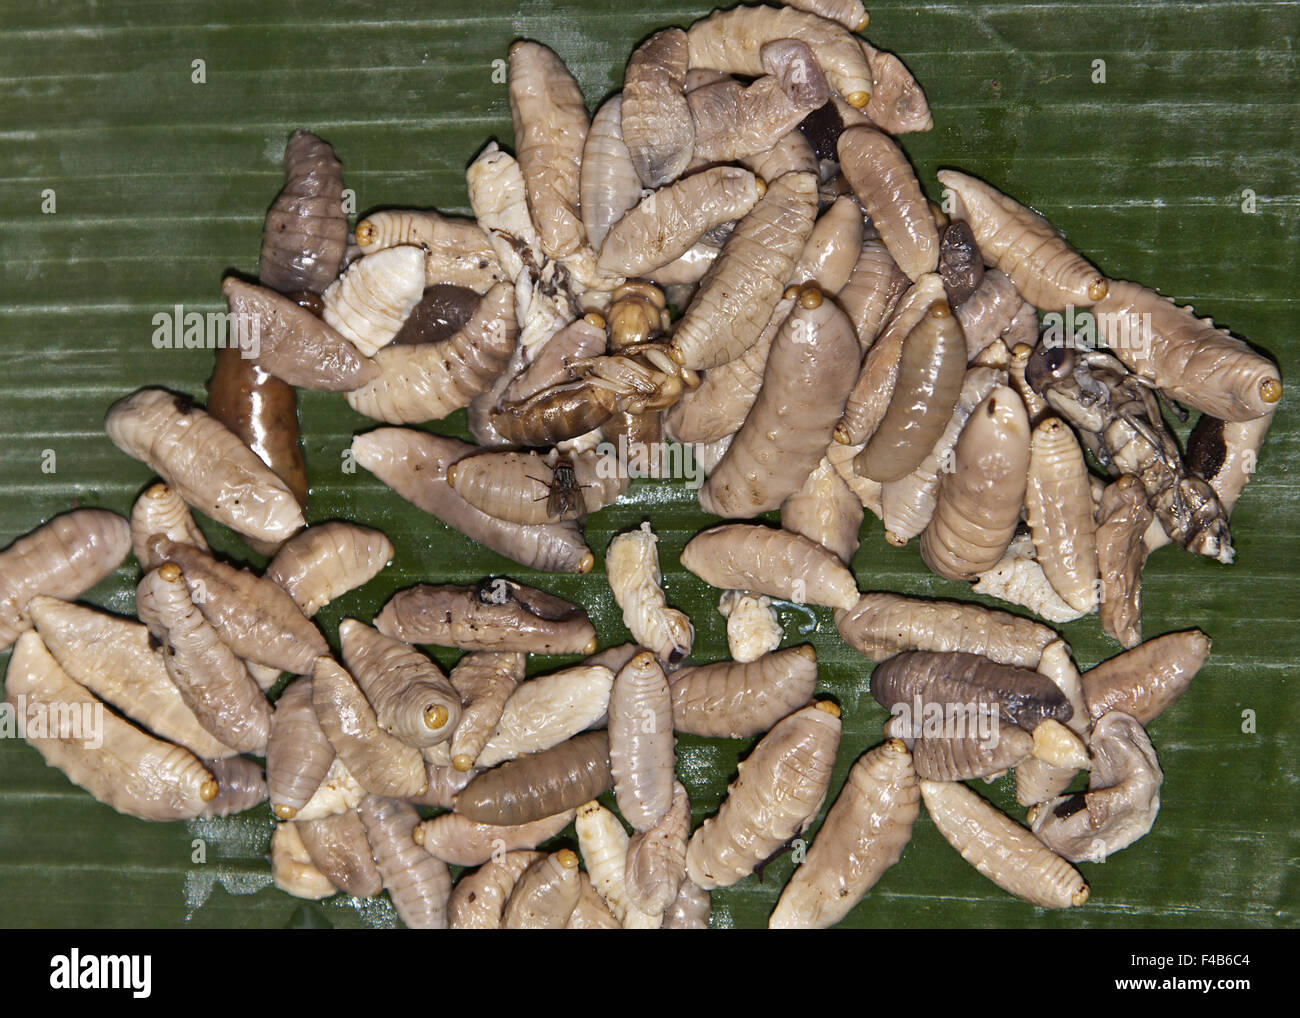 Larvae of queen bees Stock Photo